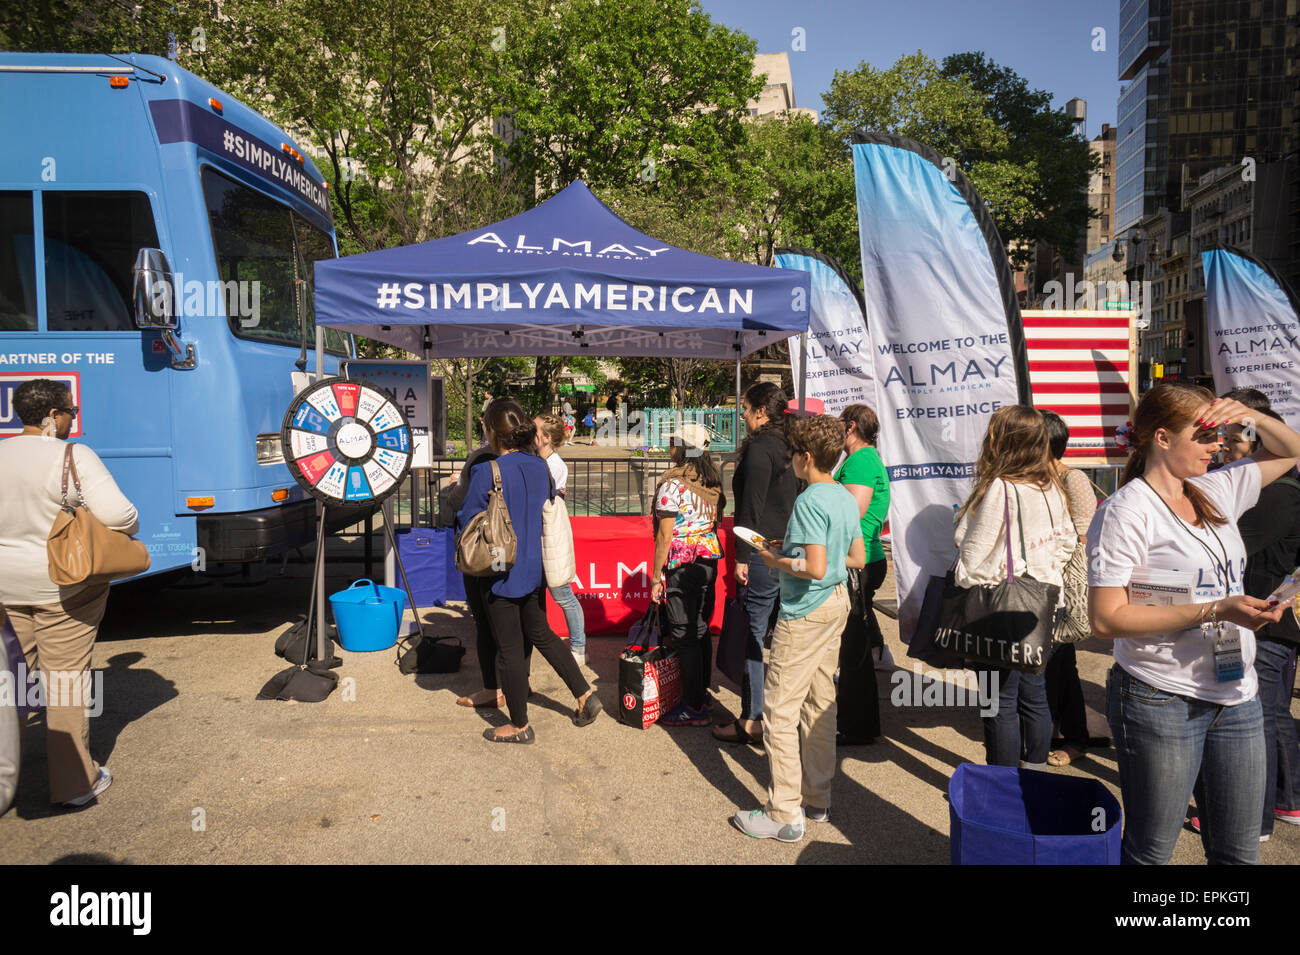 Hundreds of women turn out for the Almay Simply American branding event in Flatiron Plaza in New York on Friday, May 15, 2015. The beauty company gave away product samples, American food, and makeup touchups and with each social media post from the participants the company donated $1 to the USO. Alamy also gave $250,000 to the USO.  (© Richard B. Levine) Stock Photo